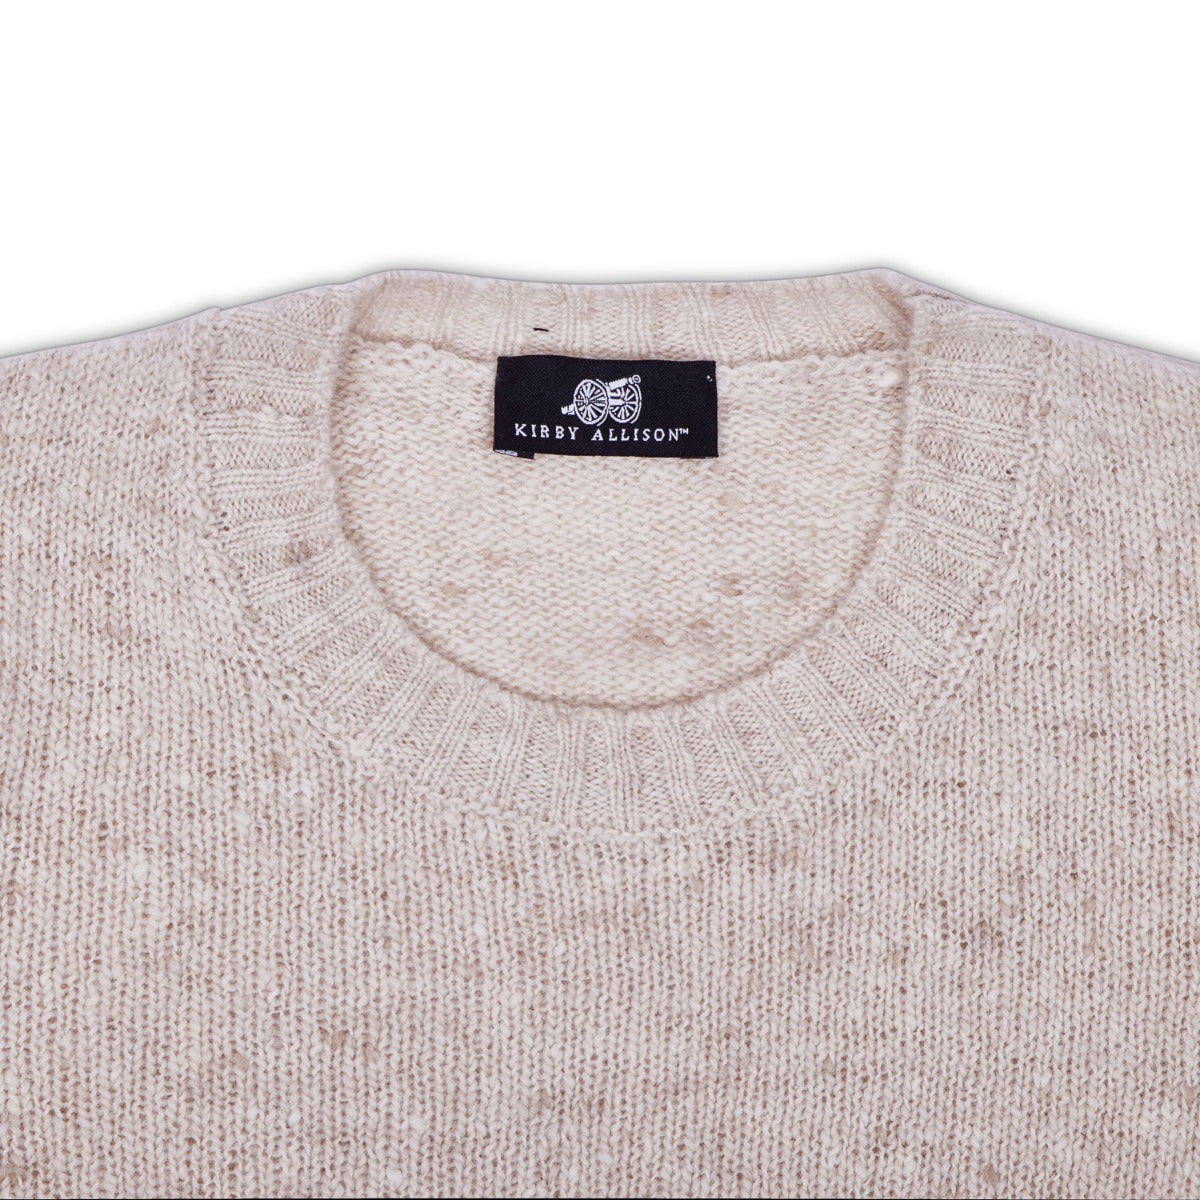 A Sovereign Grade Oatmeal Donegal Crew Neck Sweater from KirbyAllison.com with a label on it.